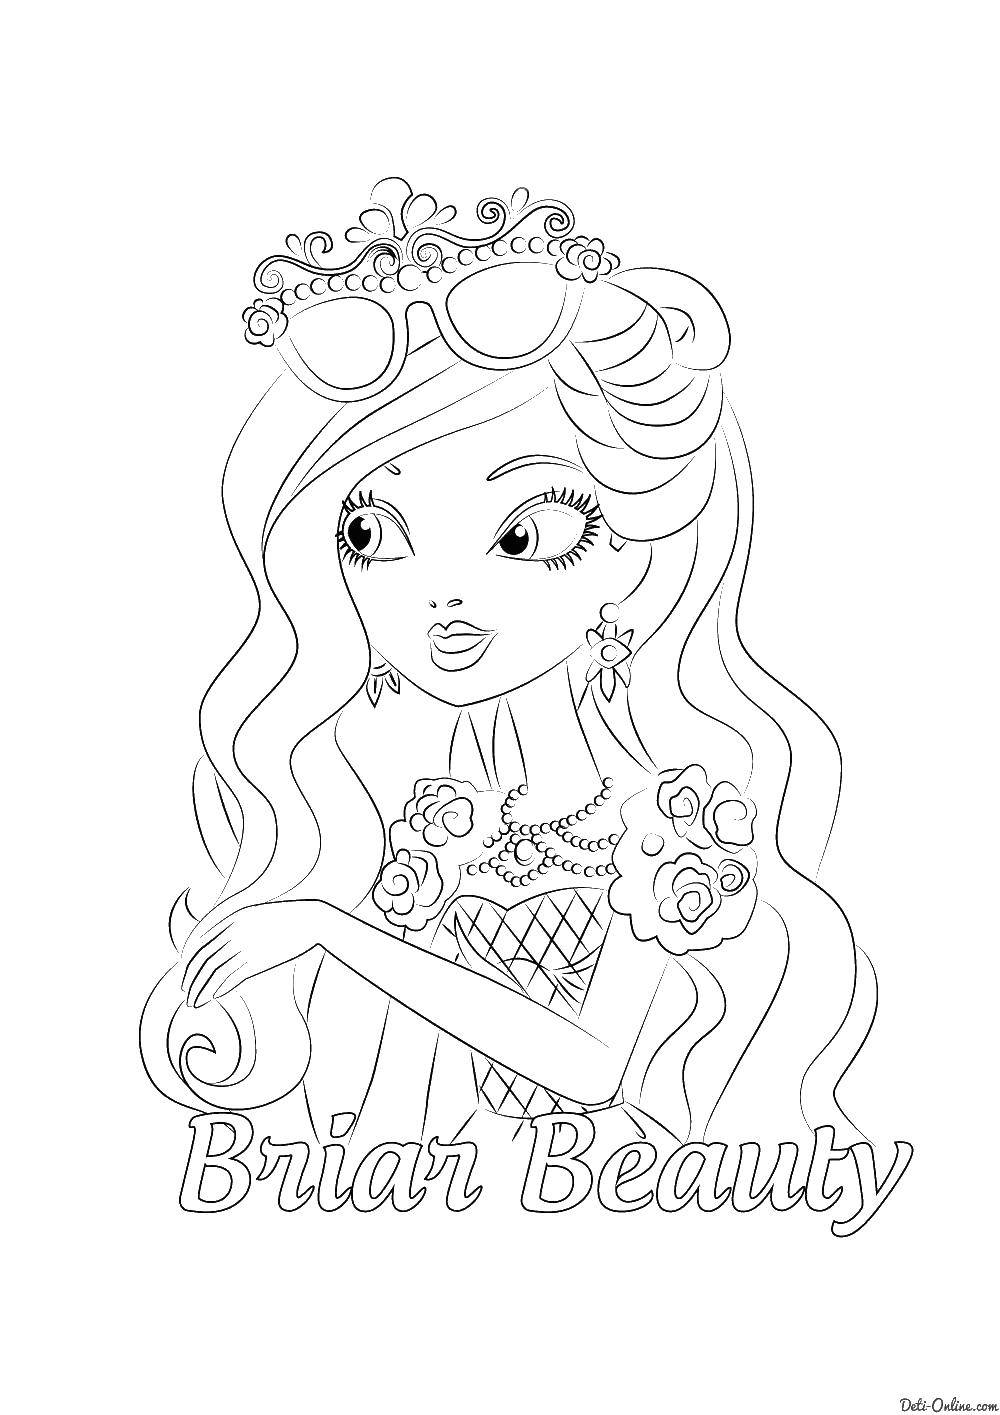 Coloring Briar beauty. Category the character of the tale. Tags:  Briar beauty, sleeping beauty.